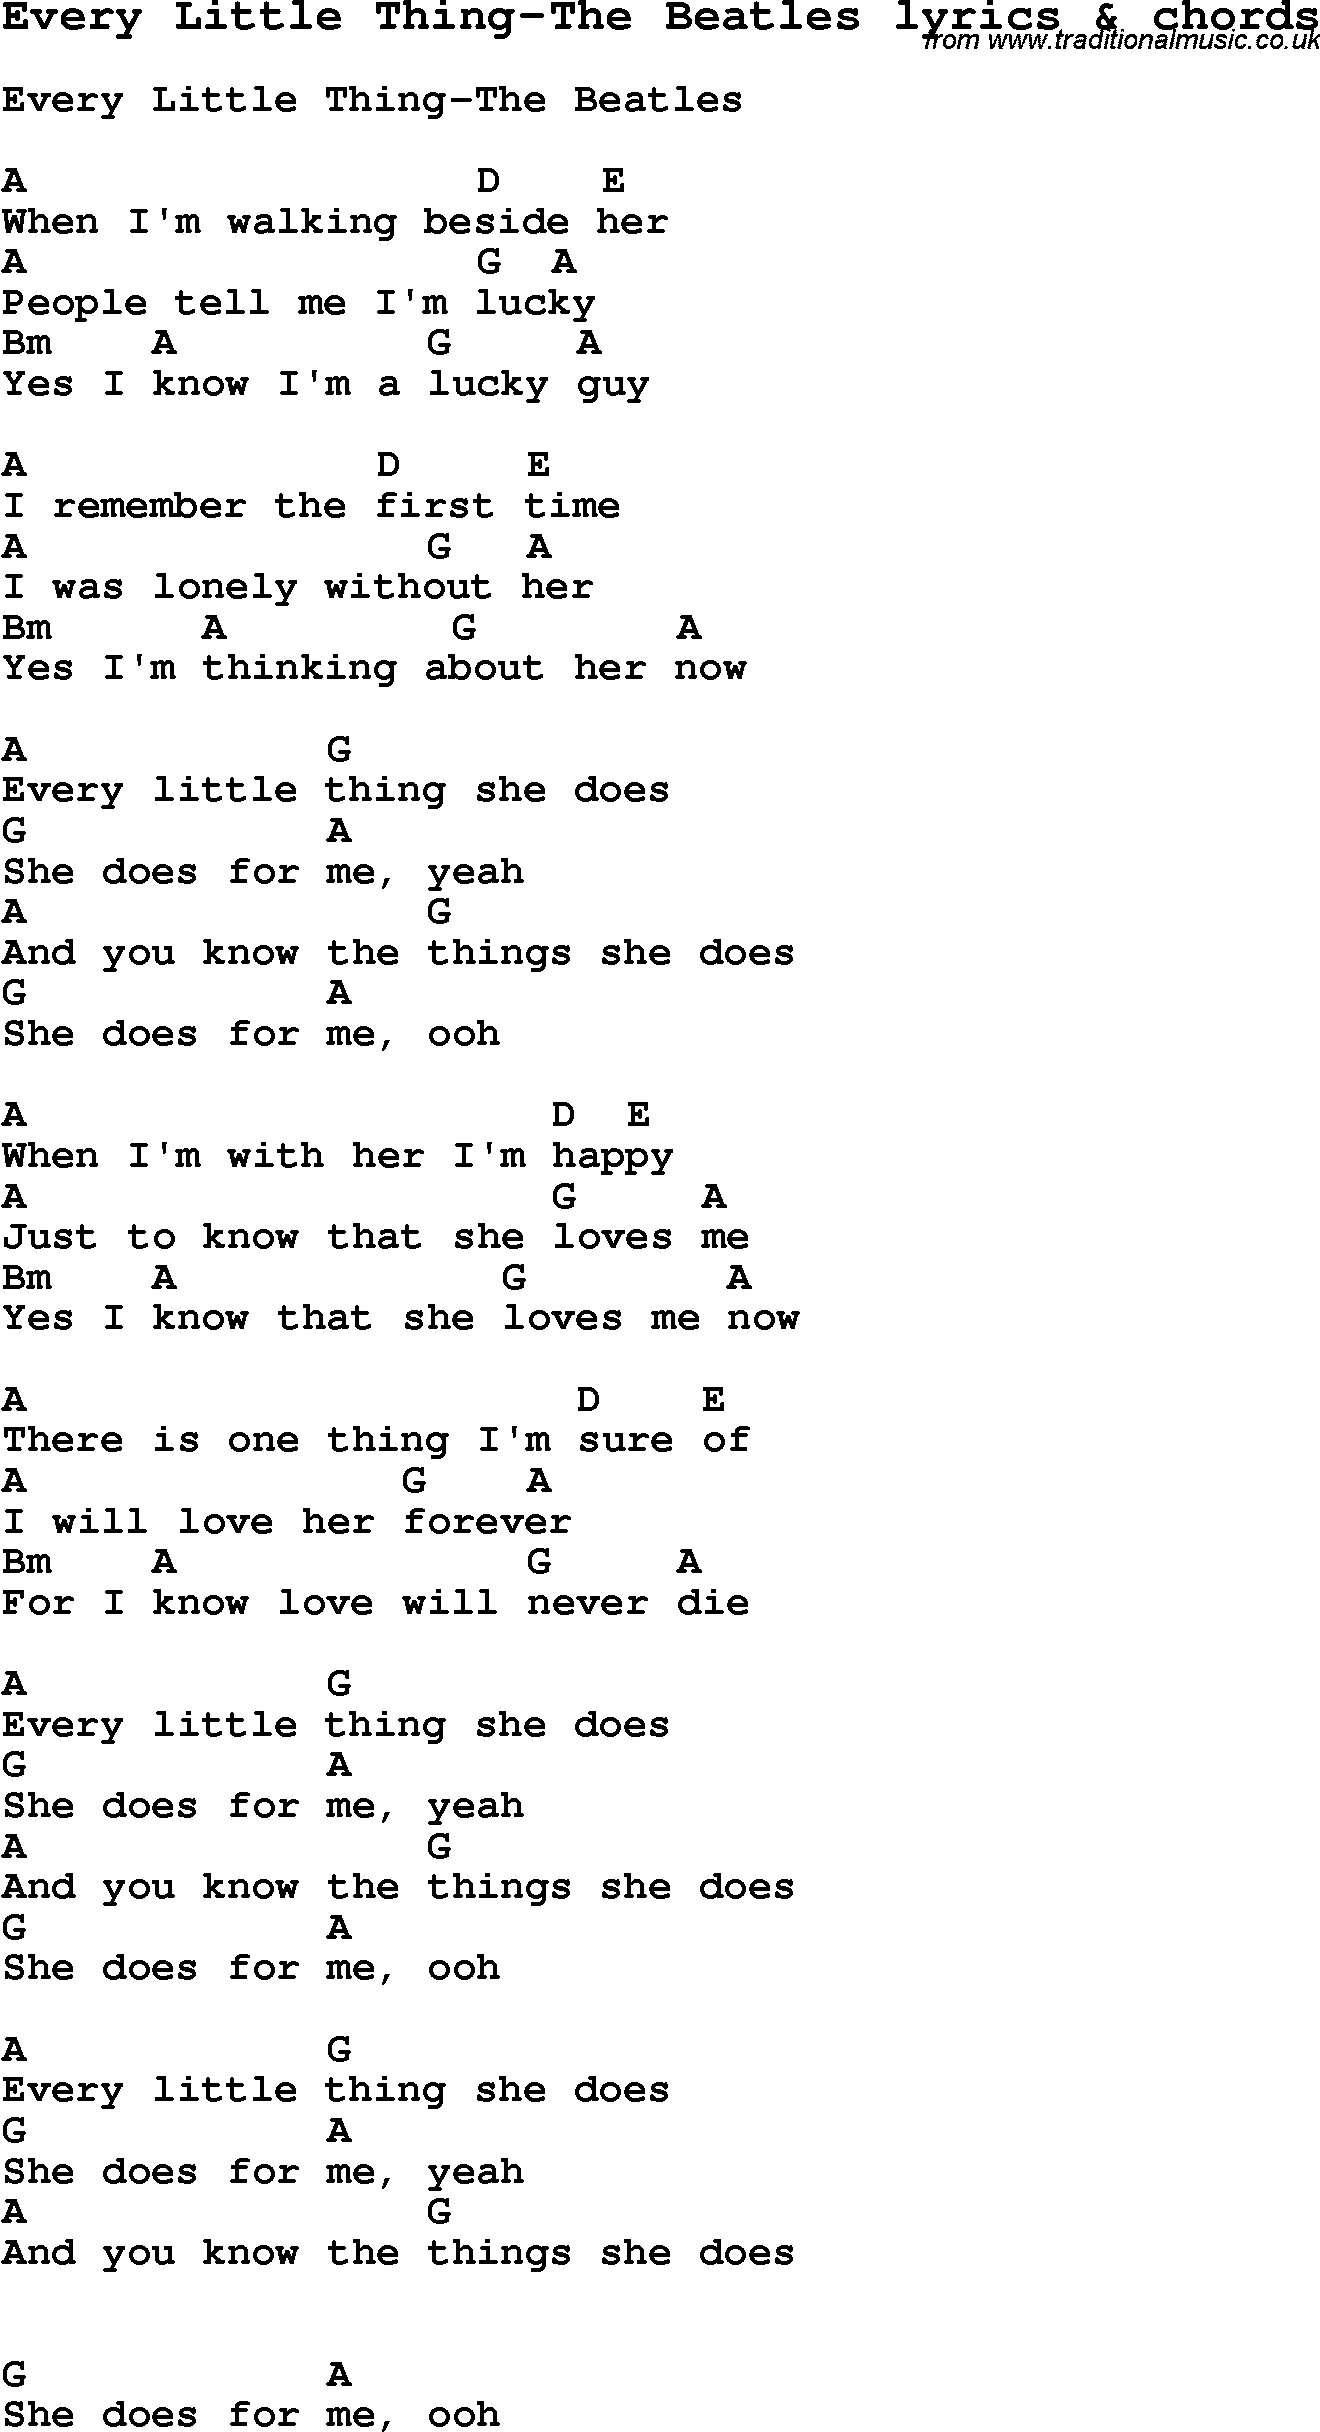 Love Song Lyrics for: Every Little Thing-The Beatles with chords for Ukulele, Guitar Banjo etc.